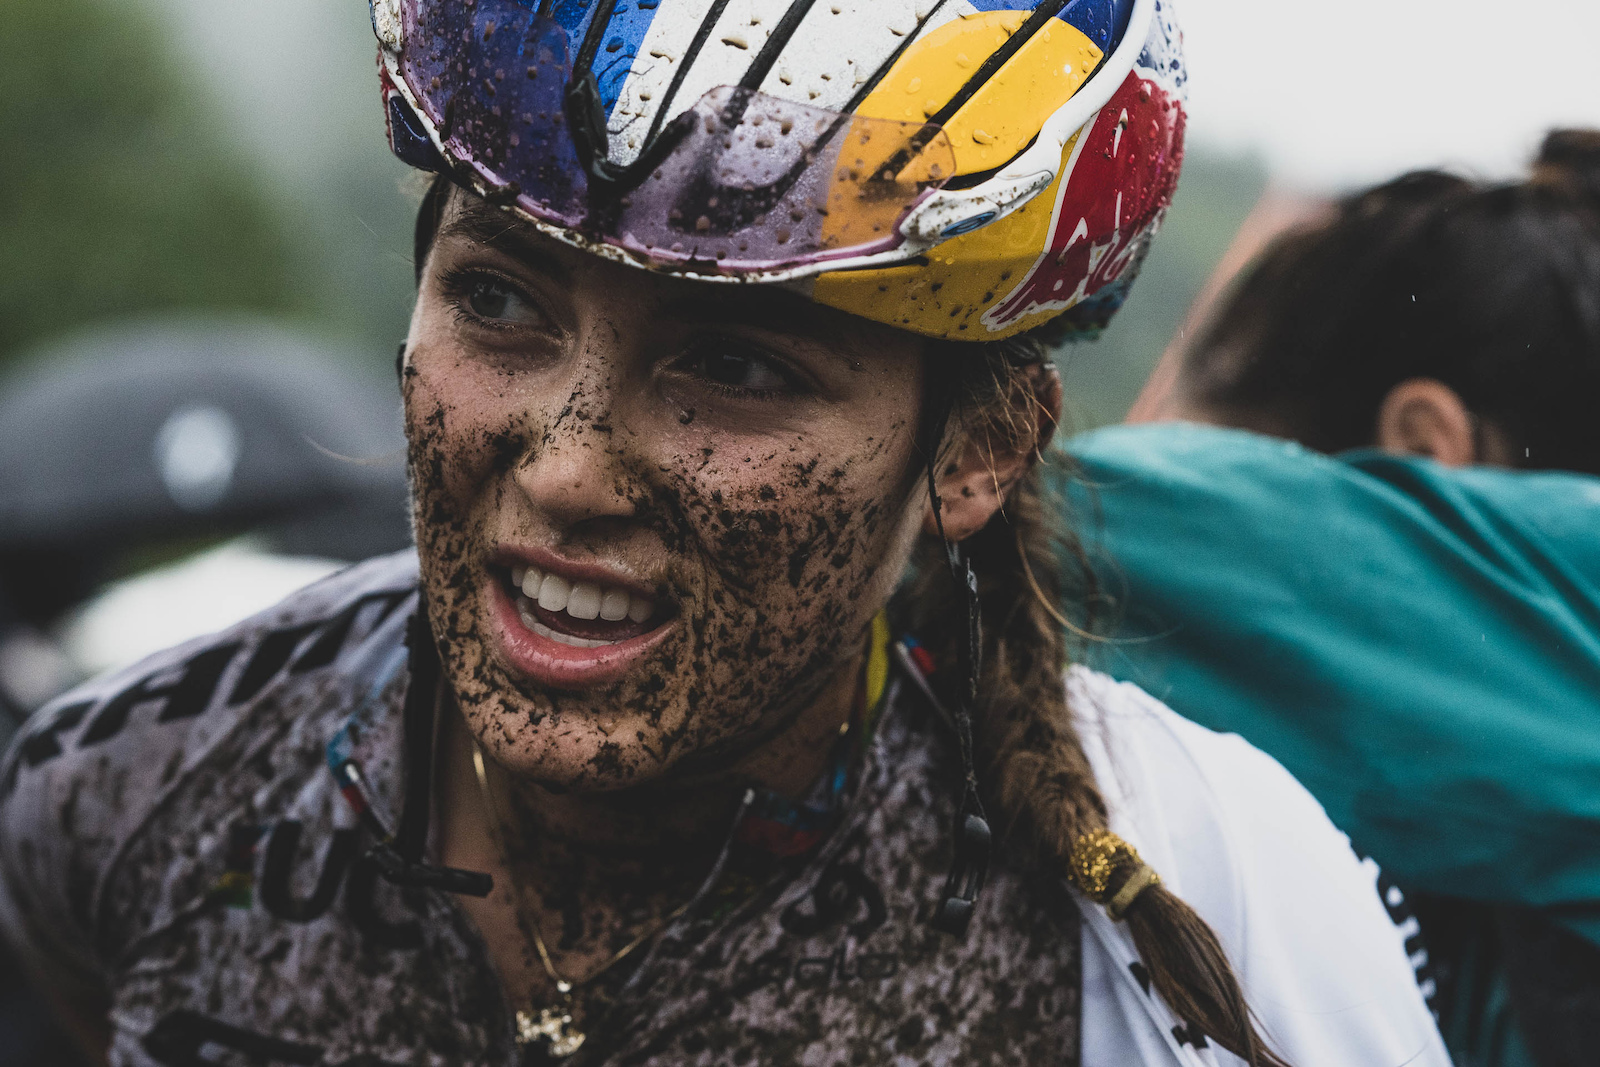 Kate Courtney had a rough one out in the muck. She took tenth.